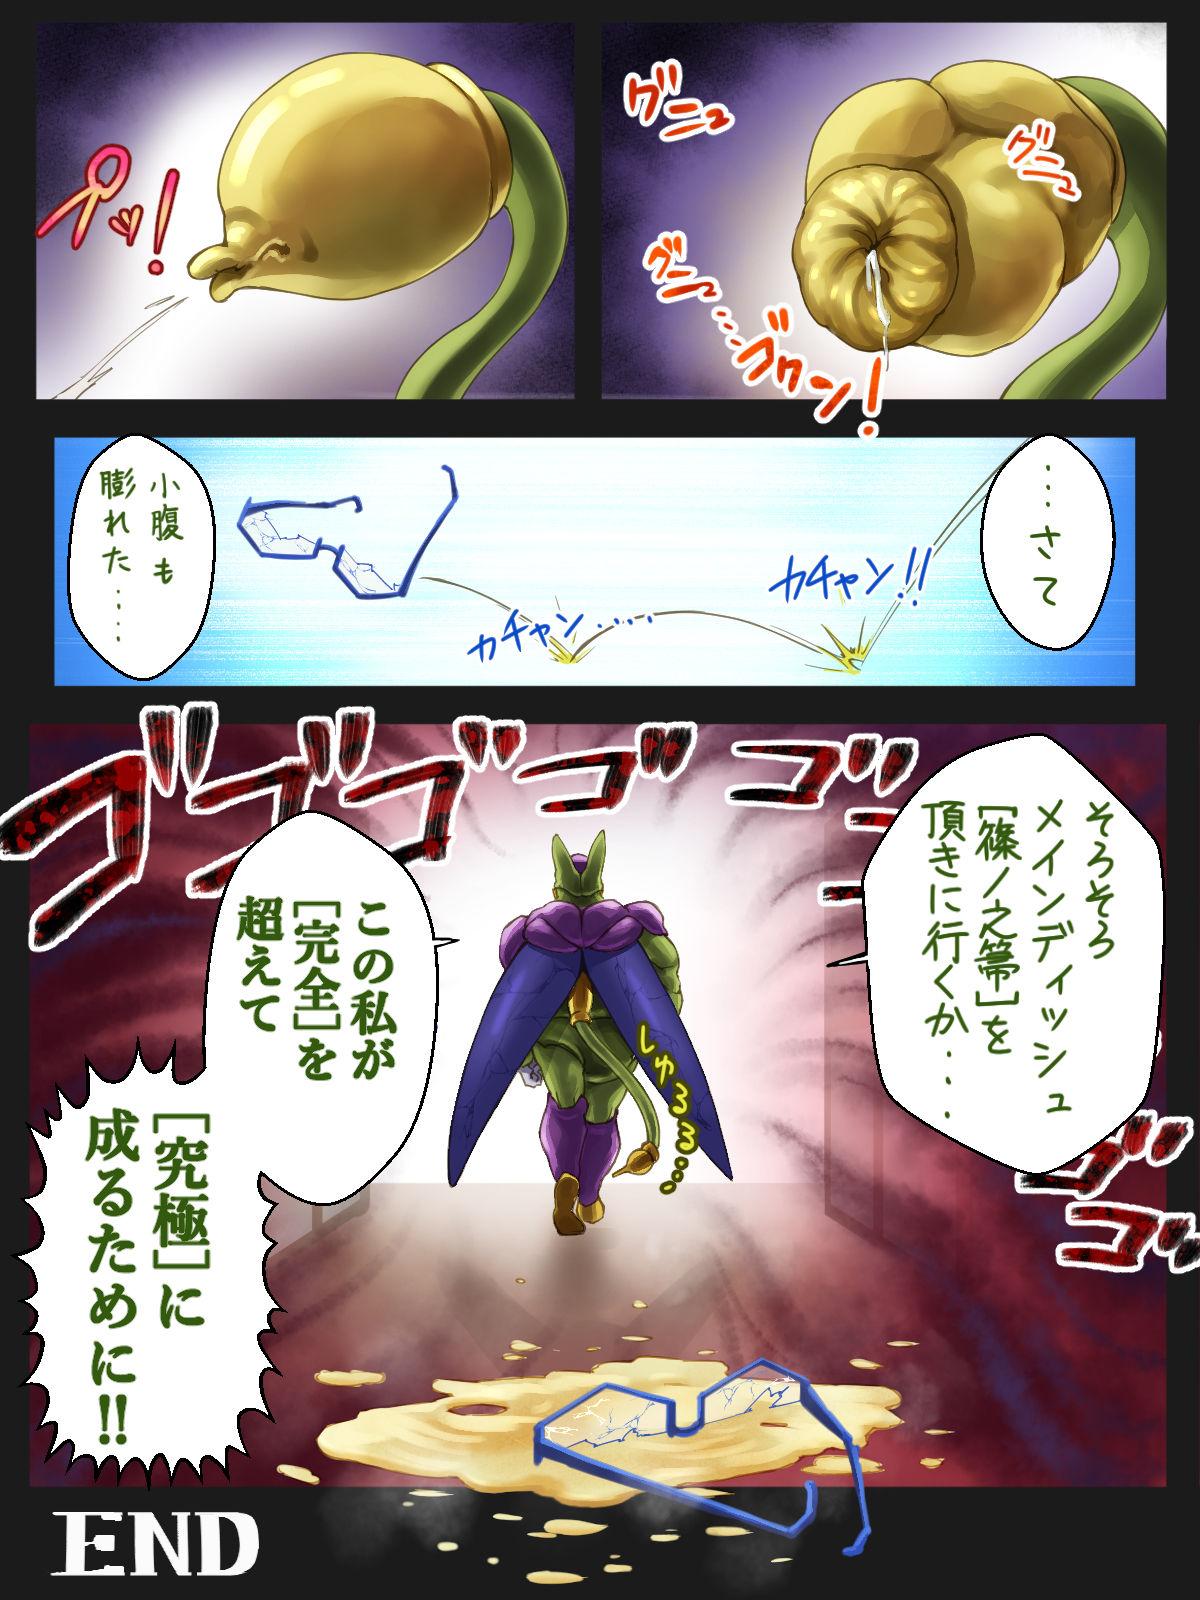 Amateur IS Absorb Heroines vol. 1 Velvet Hell - Dragon ball z Spooning - Page 10